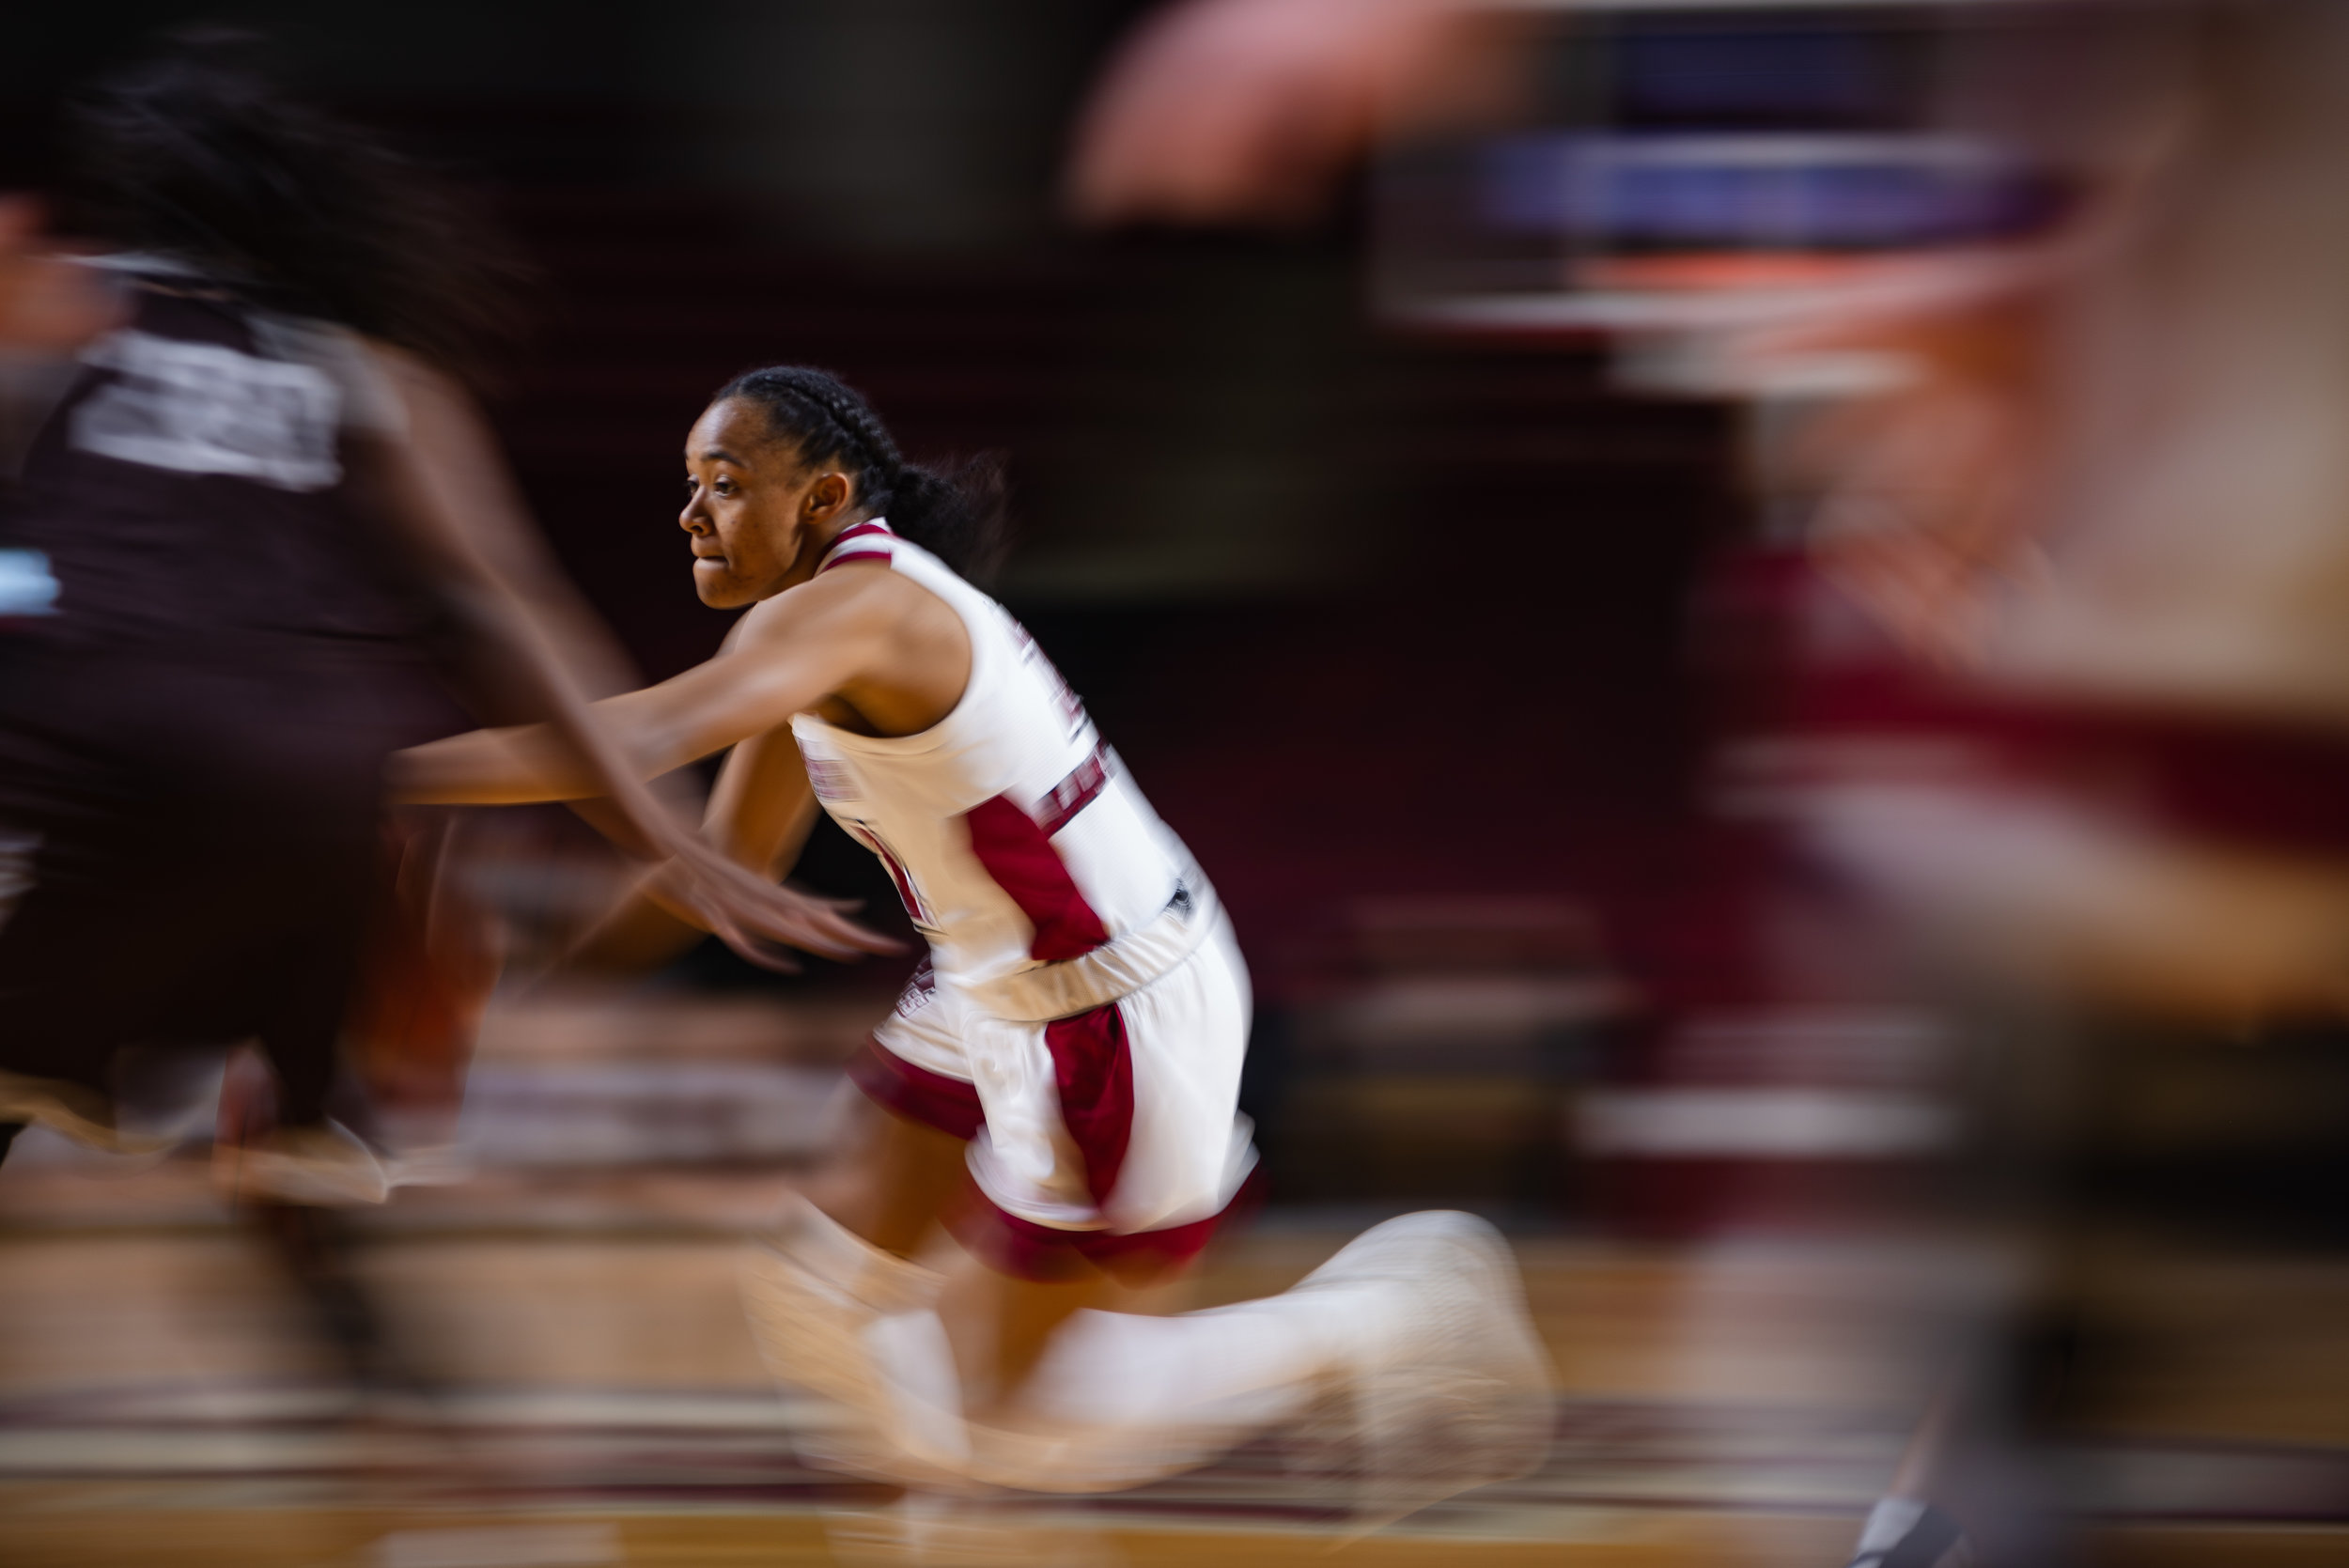  UMass Women's Basketball falls short against St. Bonaventure in a close game, losing by 1 point. The final score was 63-64 at the Mullins Center on Saturday Jan. 26, 2019.  (Photo by Judith Gibson-Okunieff) 